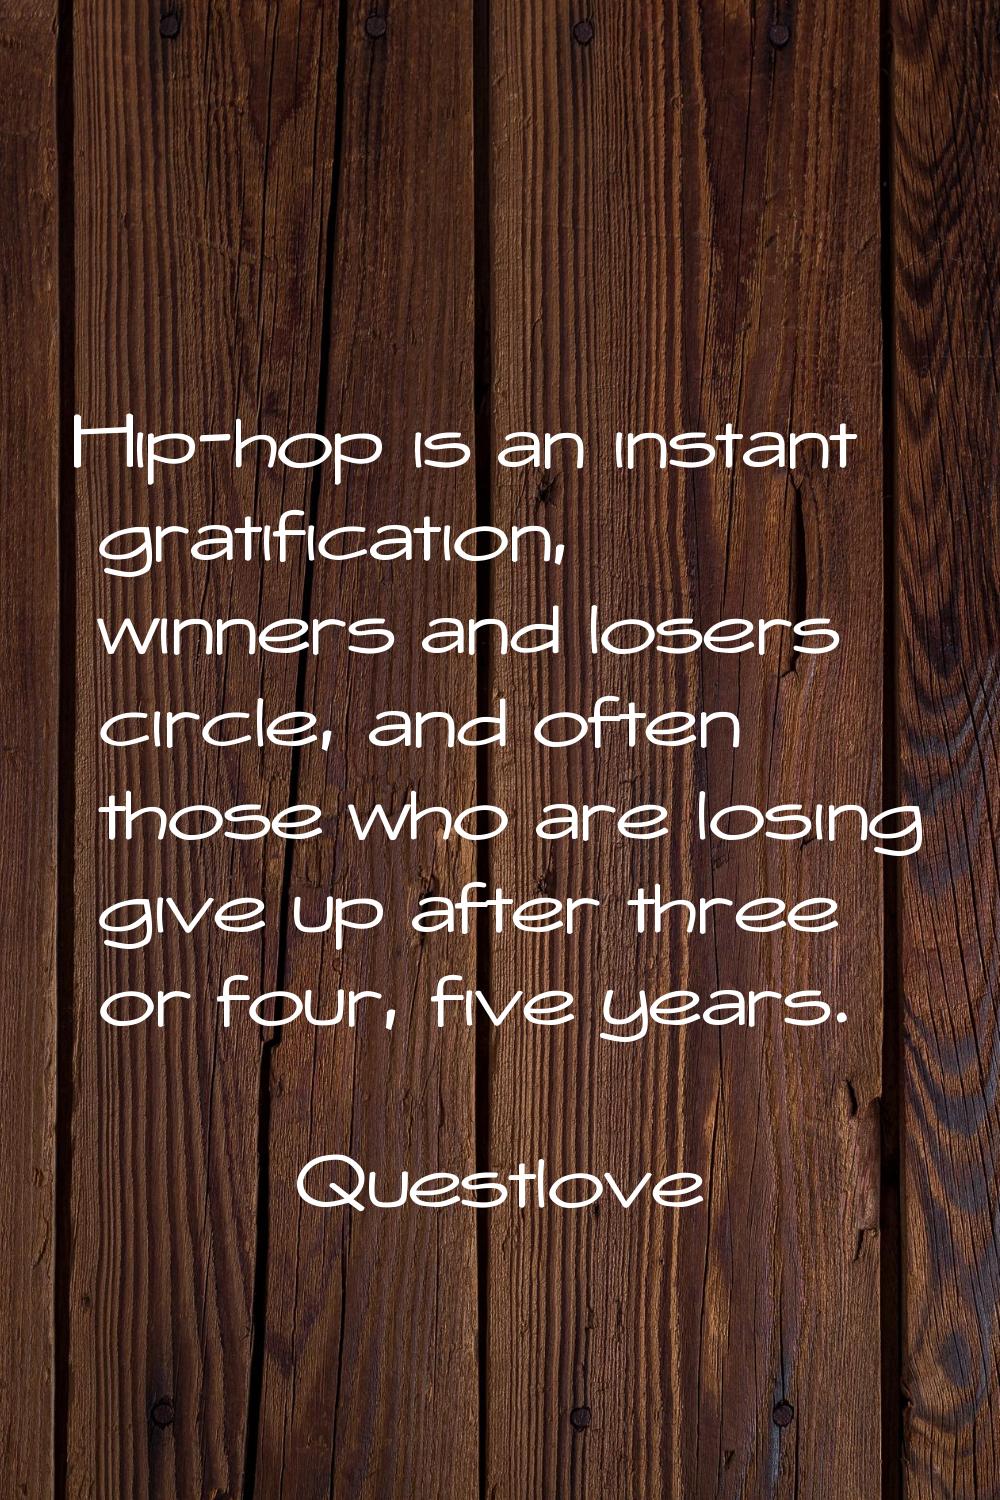 Hip-hop is an instant gratification, winners and losers circle, and often those who are losing give